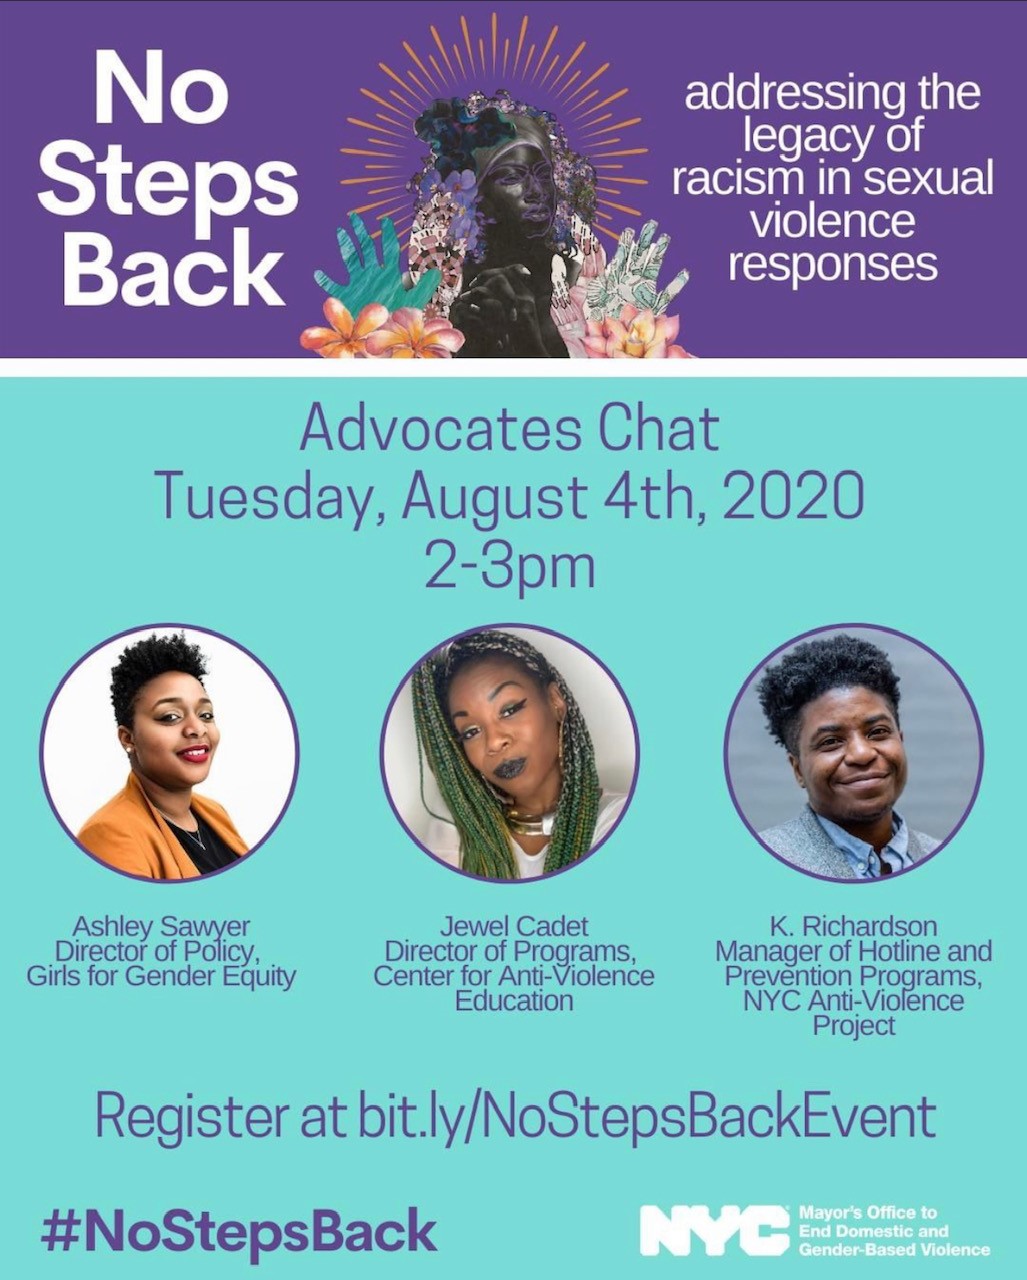 A flyer for the No Steps Back Event